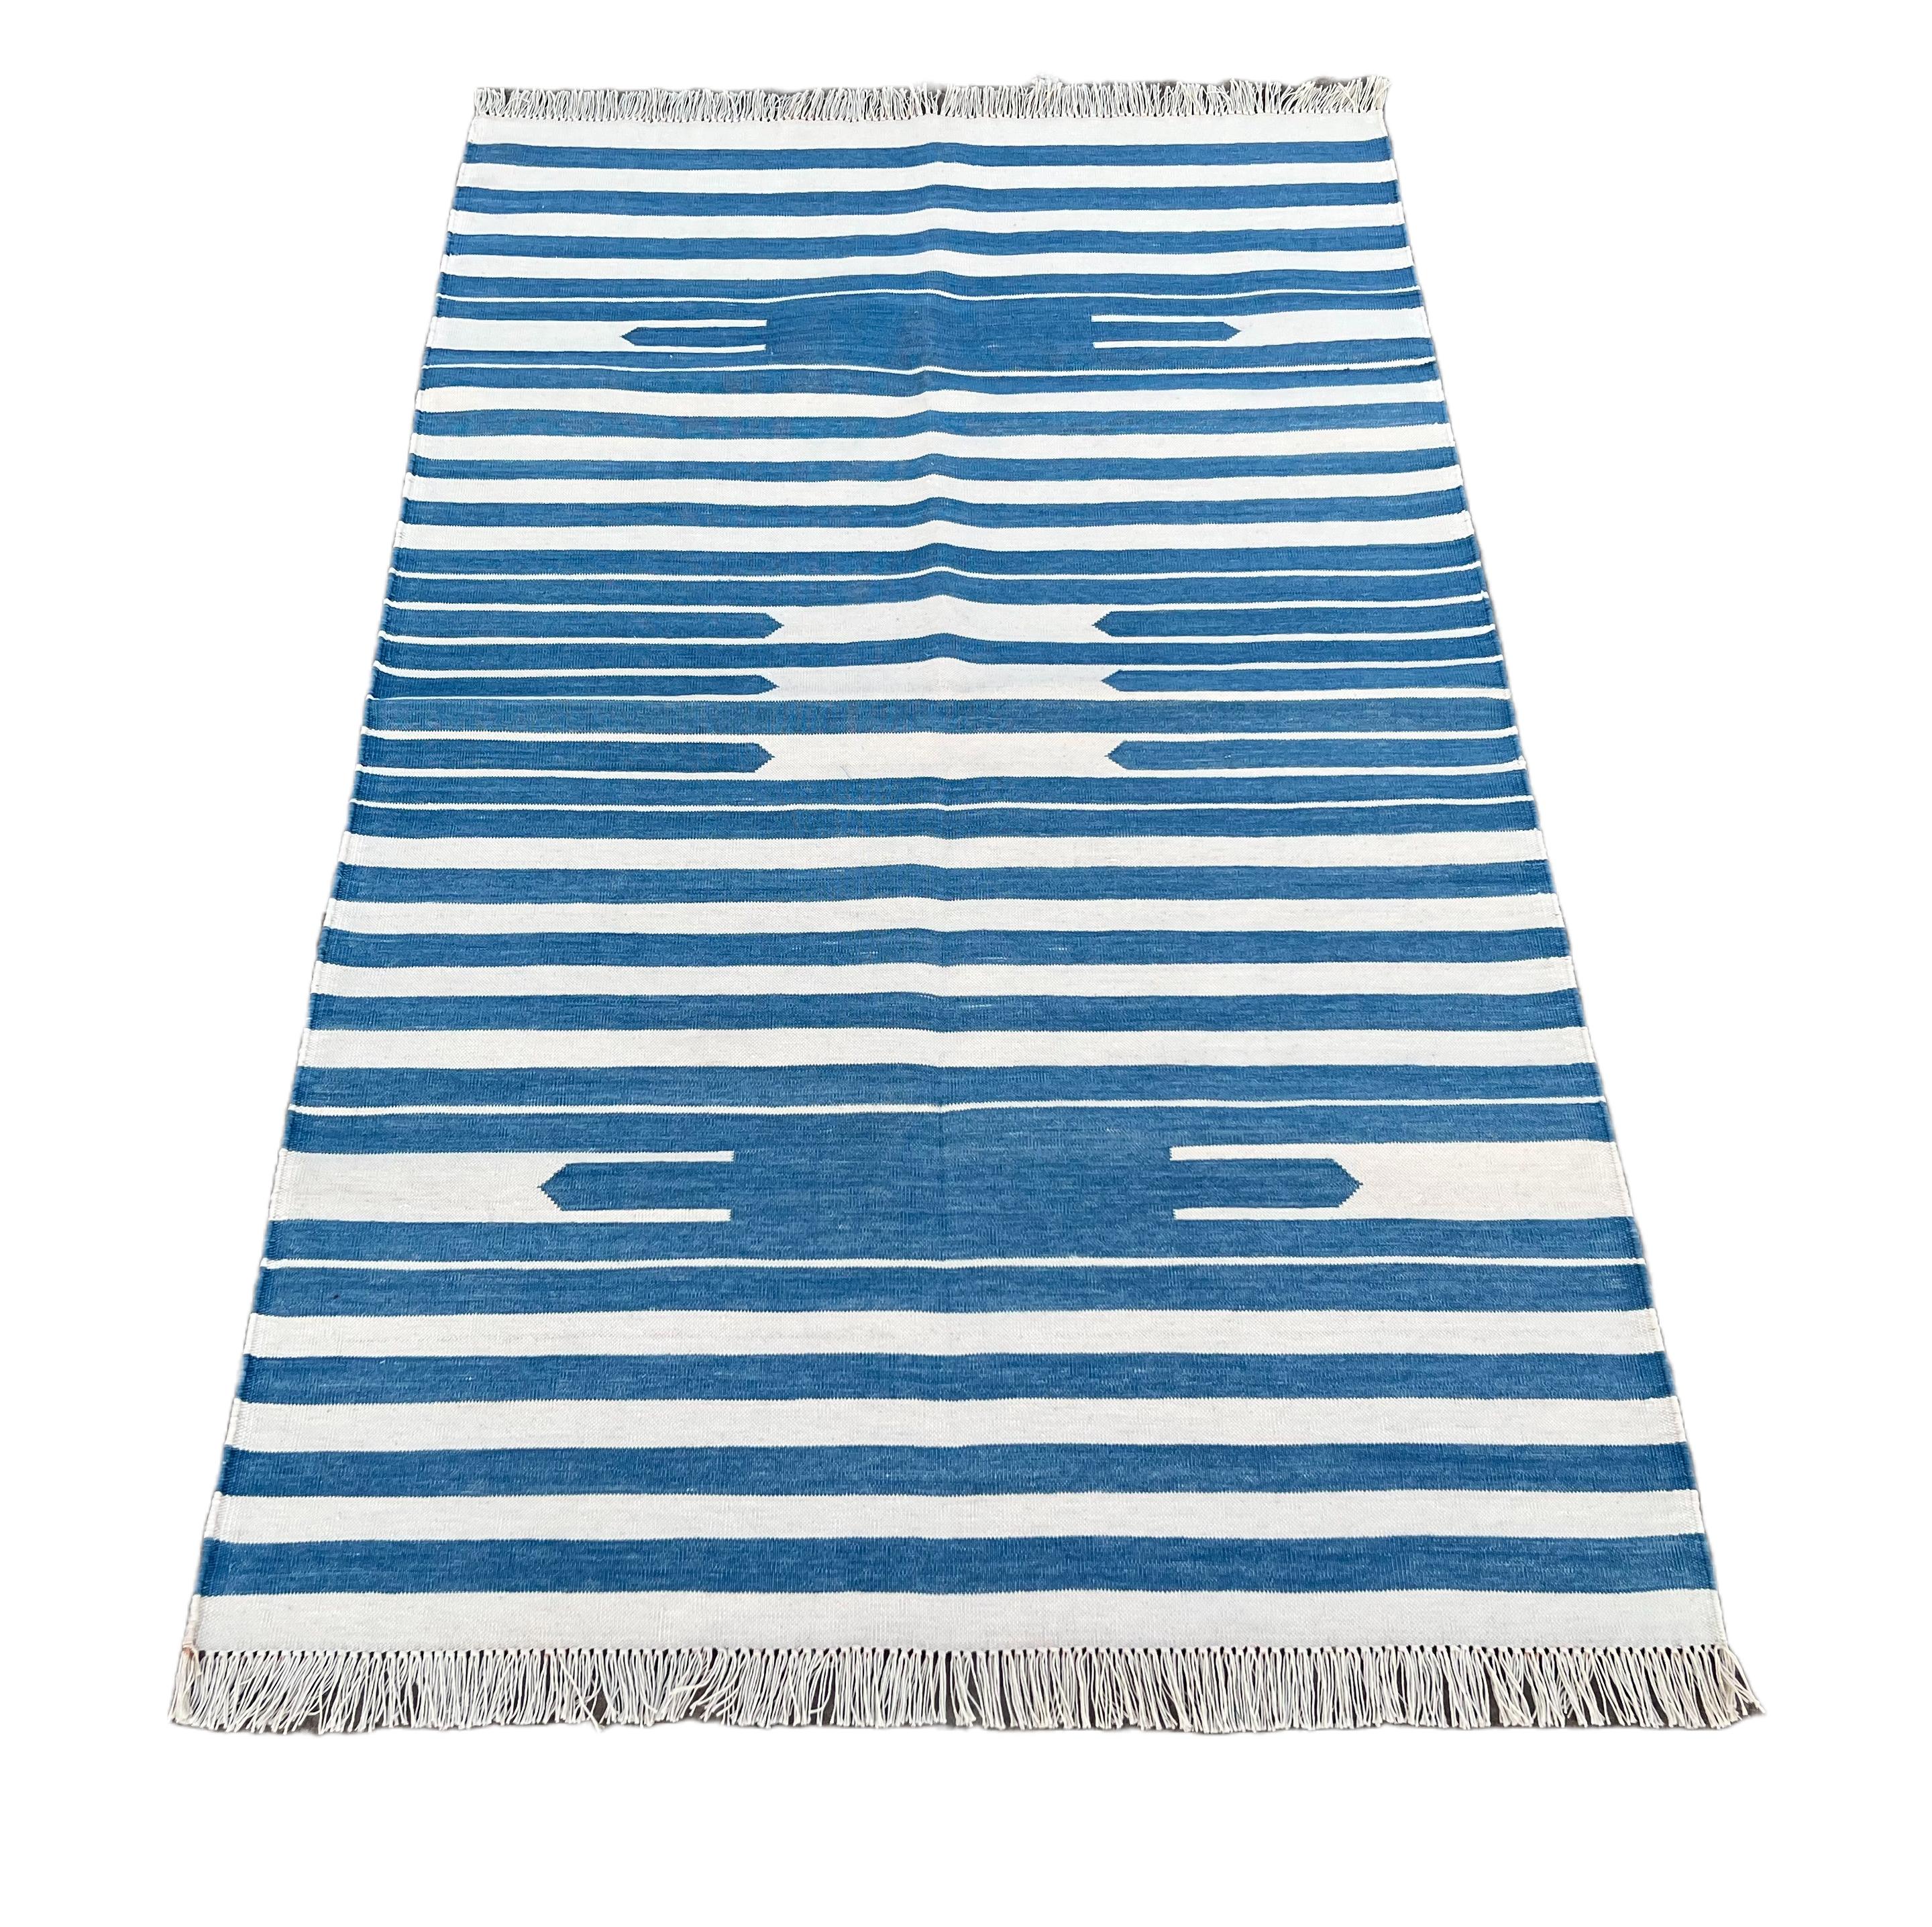 Handmade Cotton Area Flat Weave Rug, 3'x5' Blue And White Striped Indian Dhurrie In New Condition For Sale In Jaipur, IN